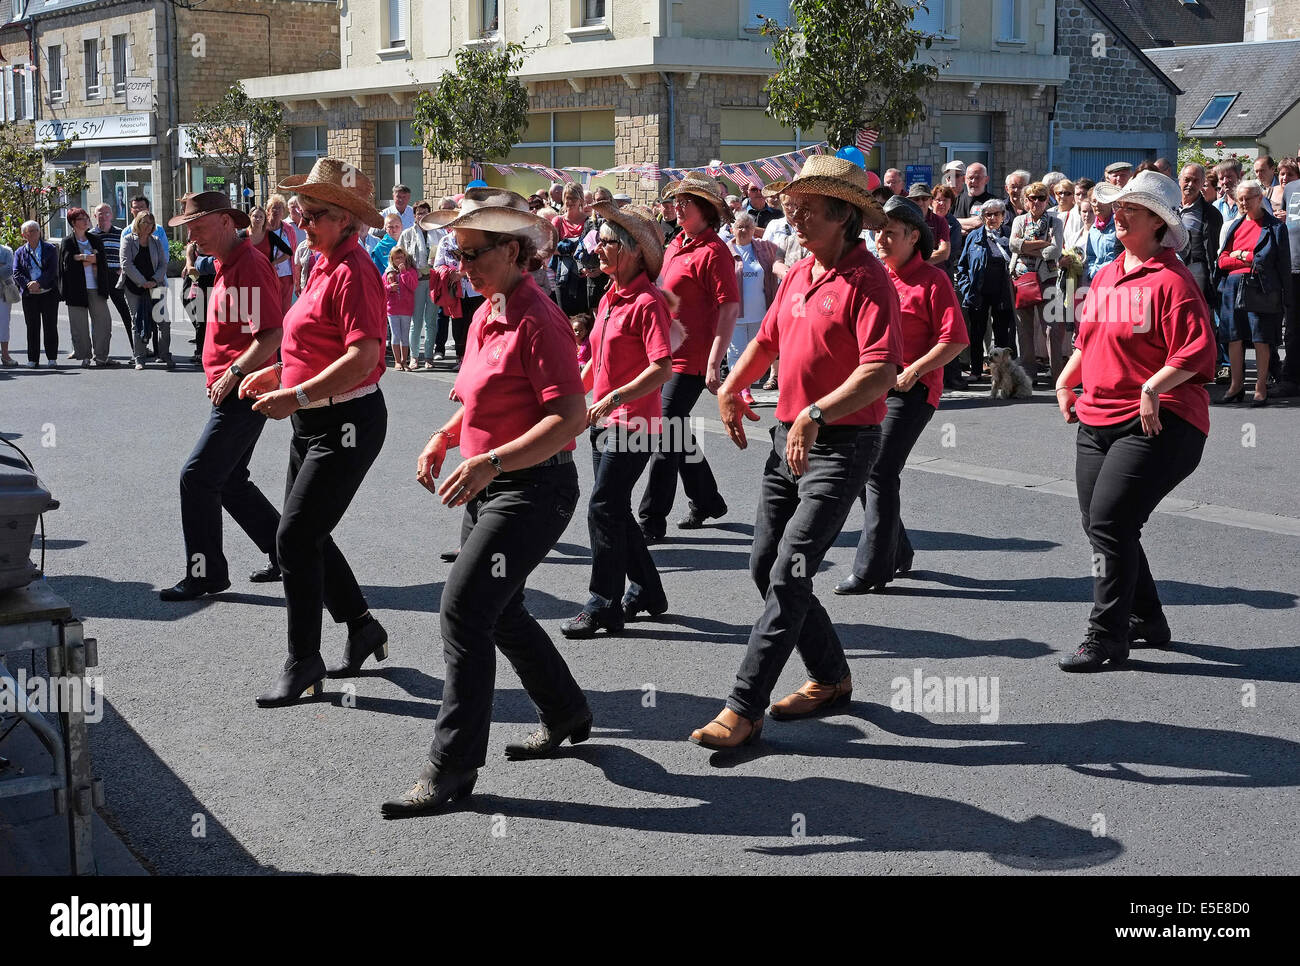 line dancing in french street, villedieu les poeles, normandy, france Stock Photo